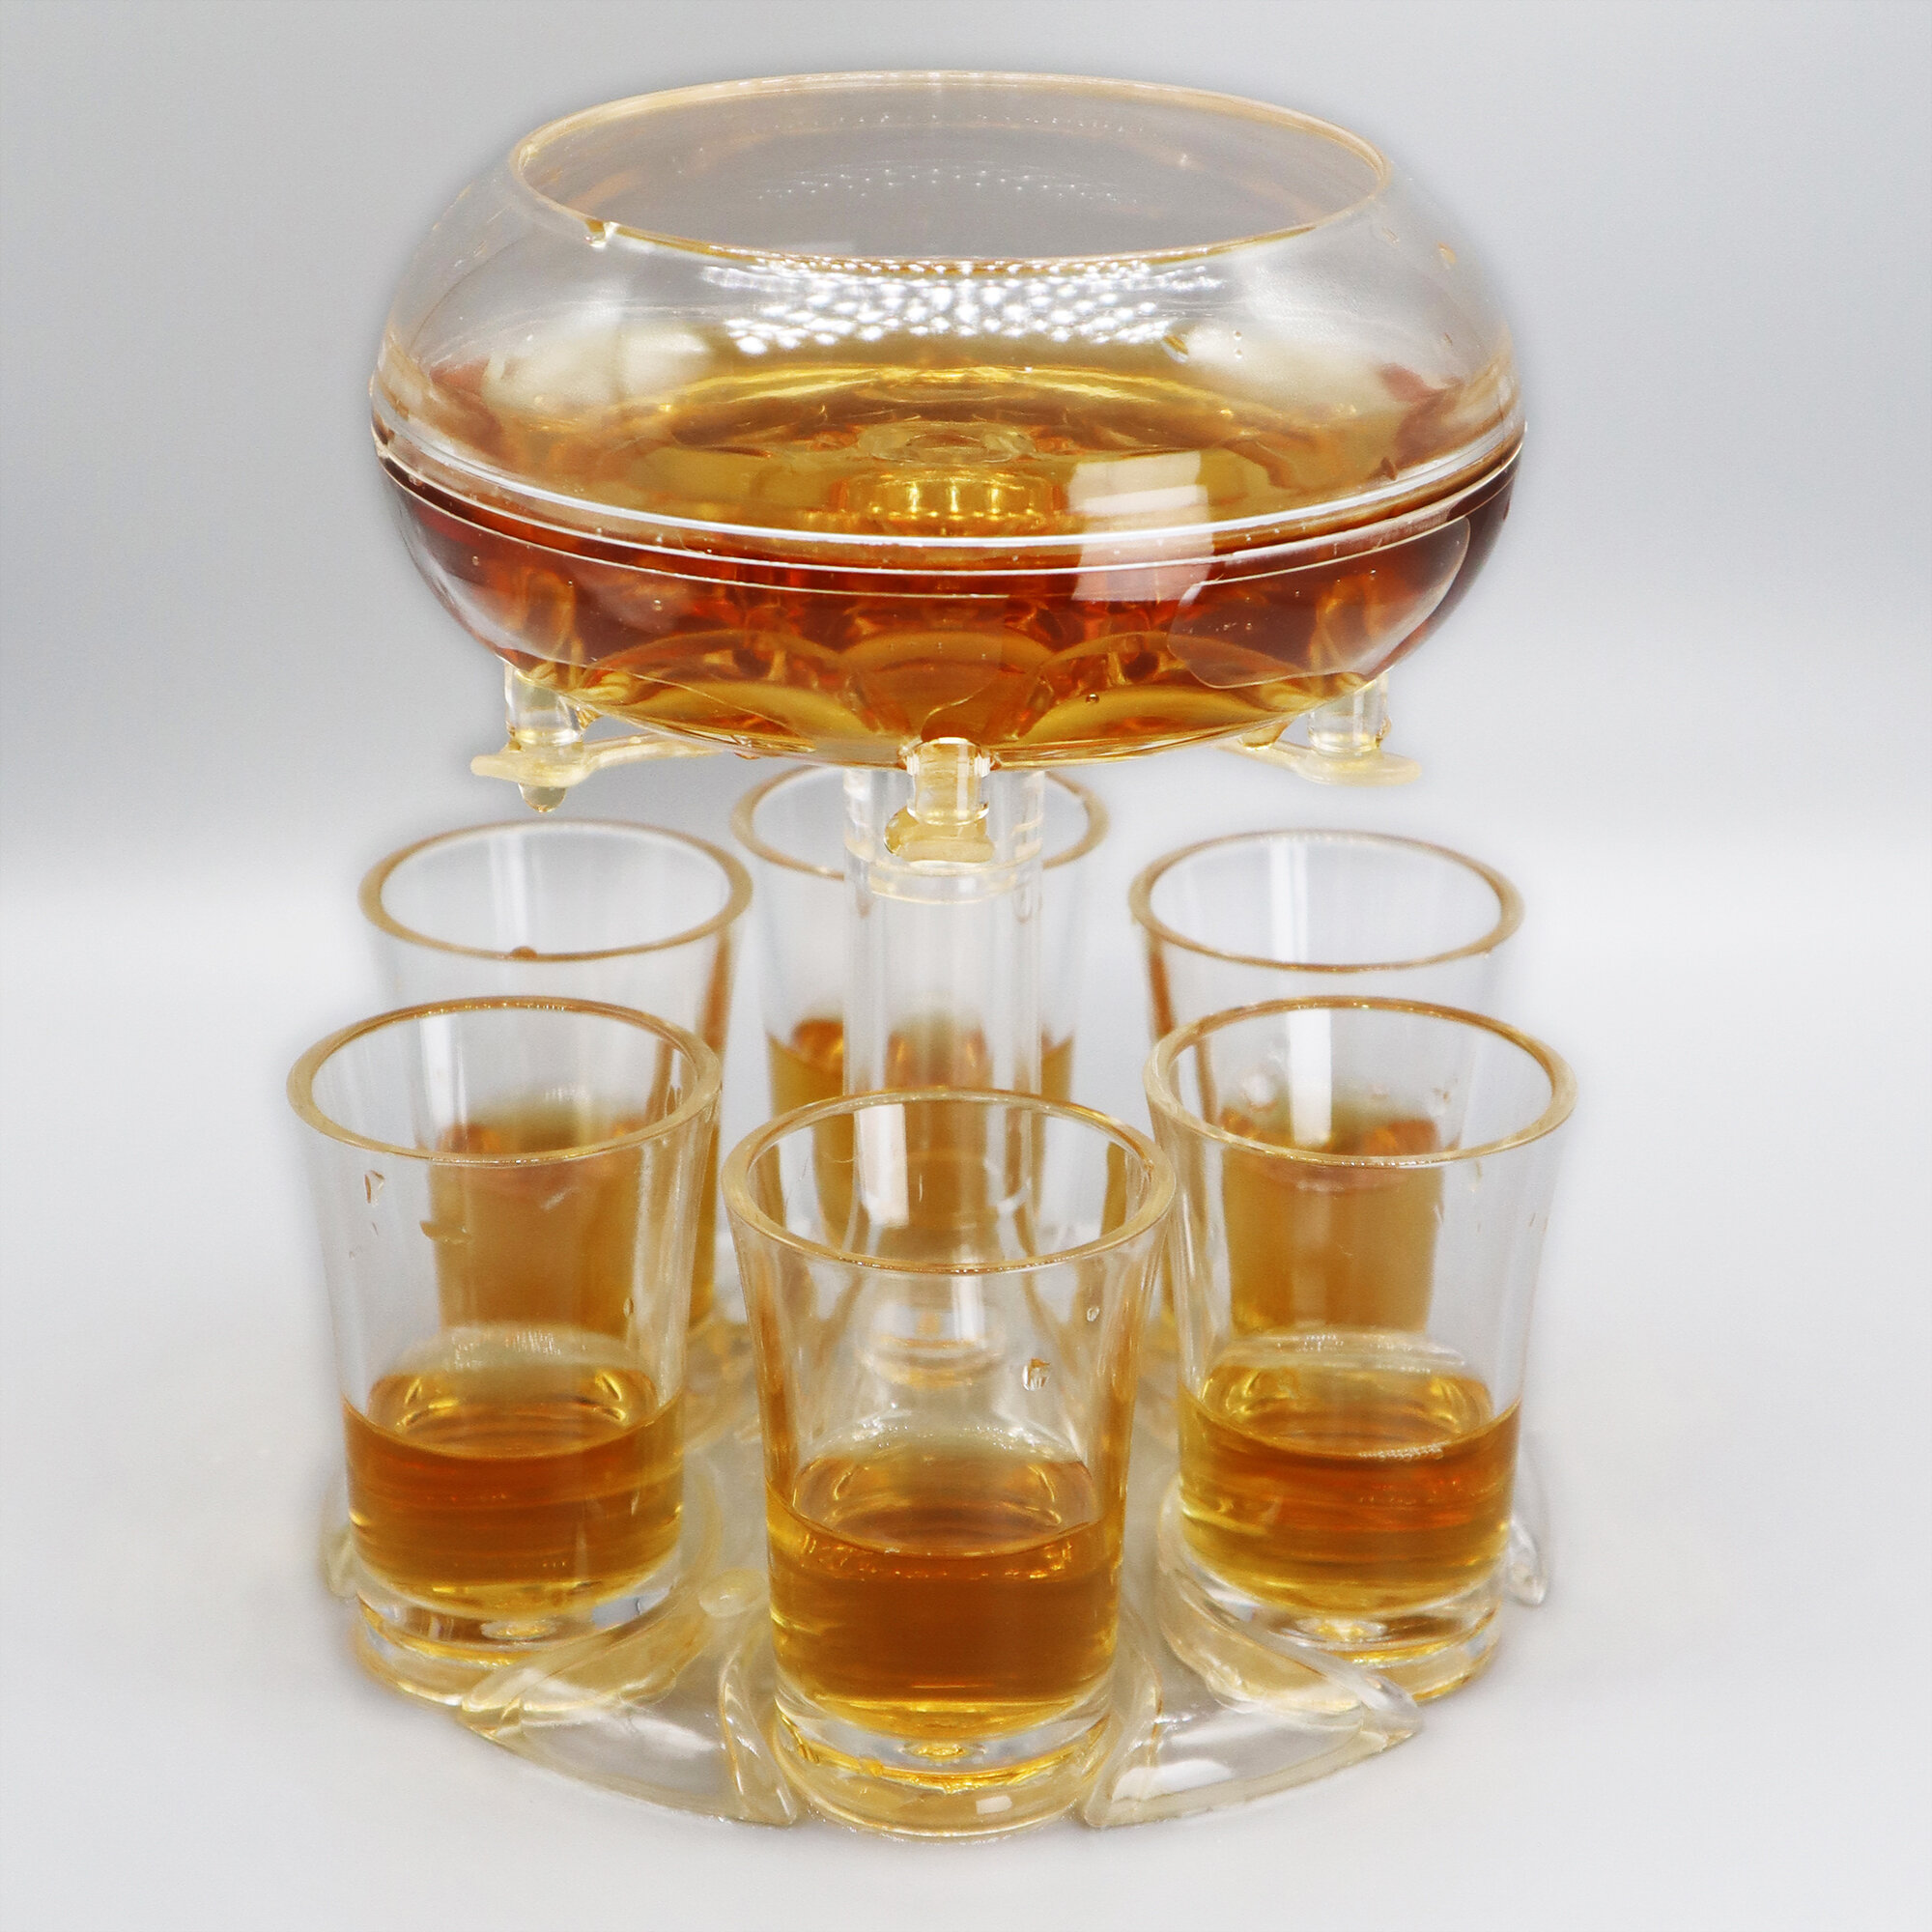 6 Shot Glass Dispenser With Stand Holder Drink Game Liquor Glasses Party Wedding